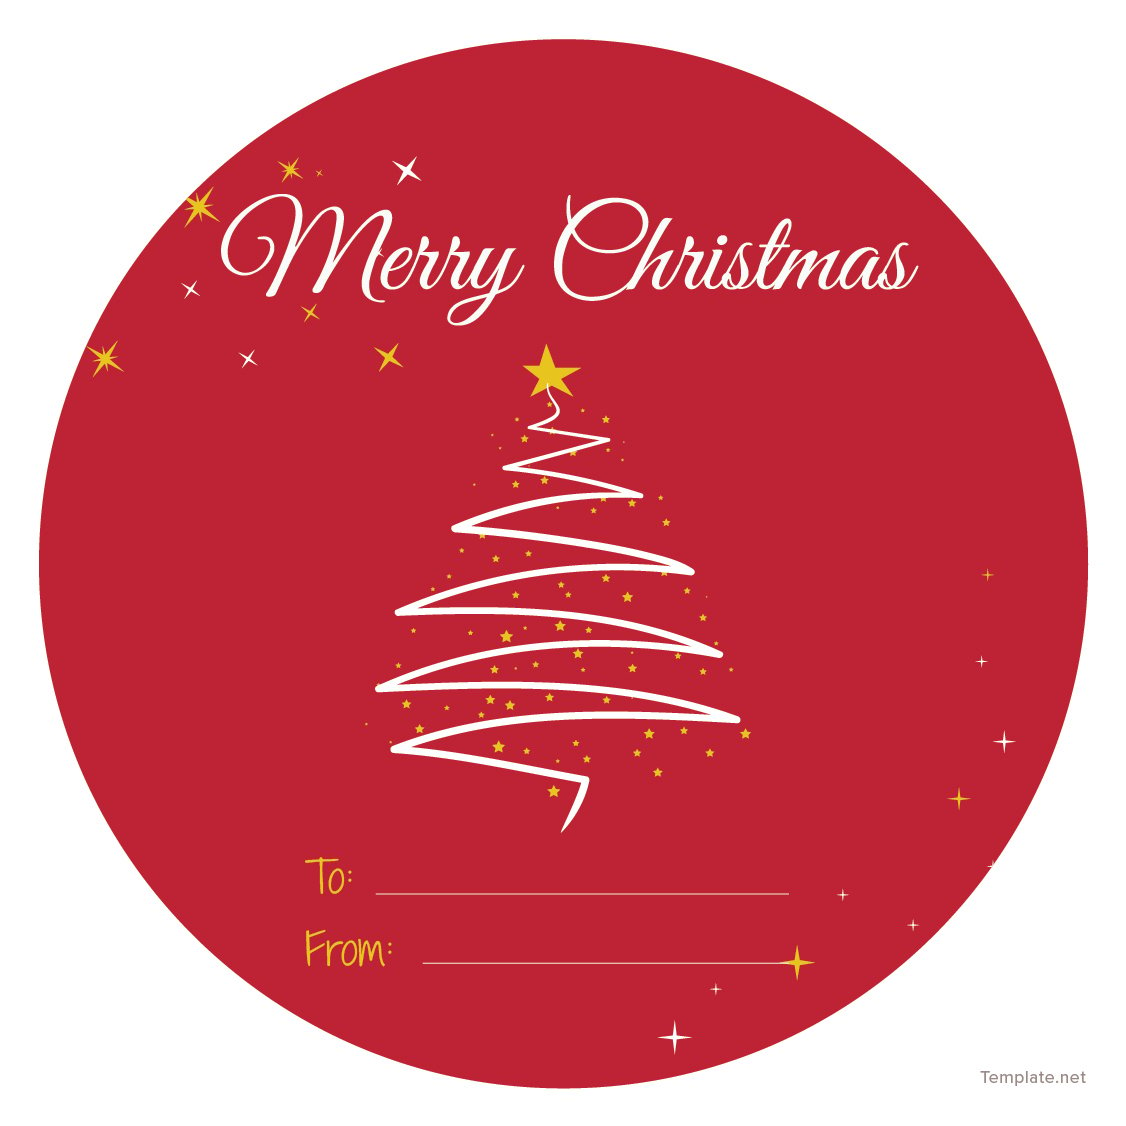 free-round-gift-tag-template-in-adobe-photoshop-illustrator-template